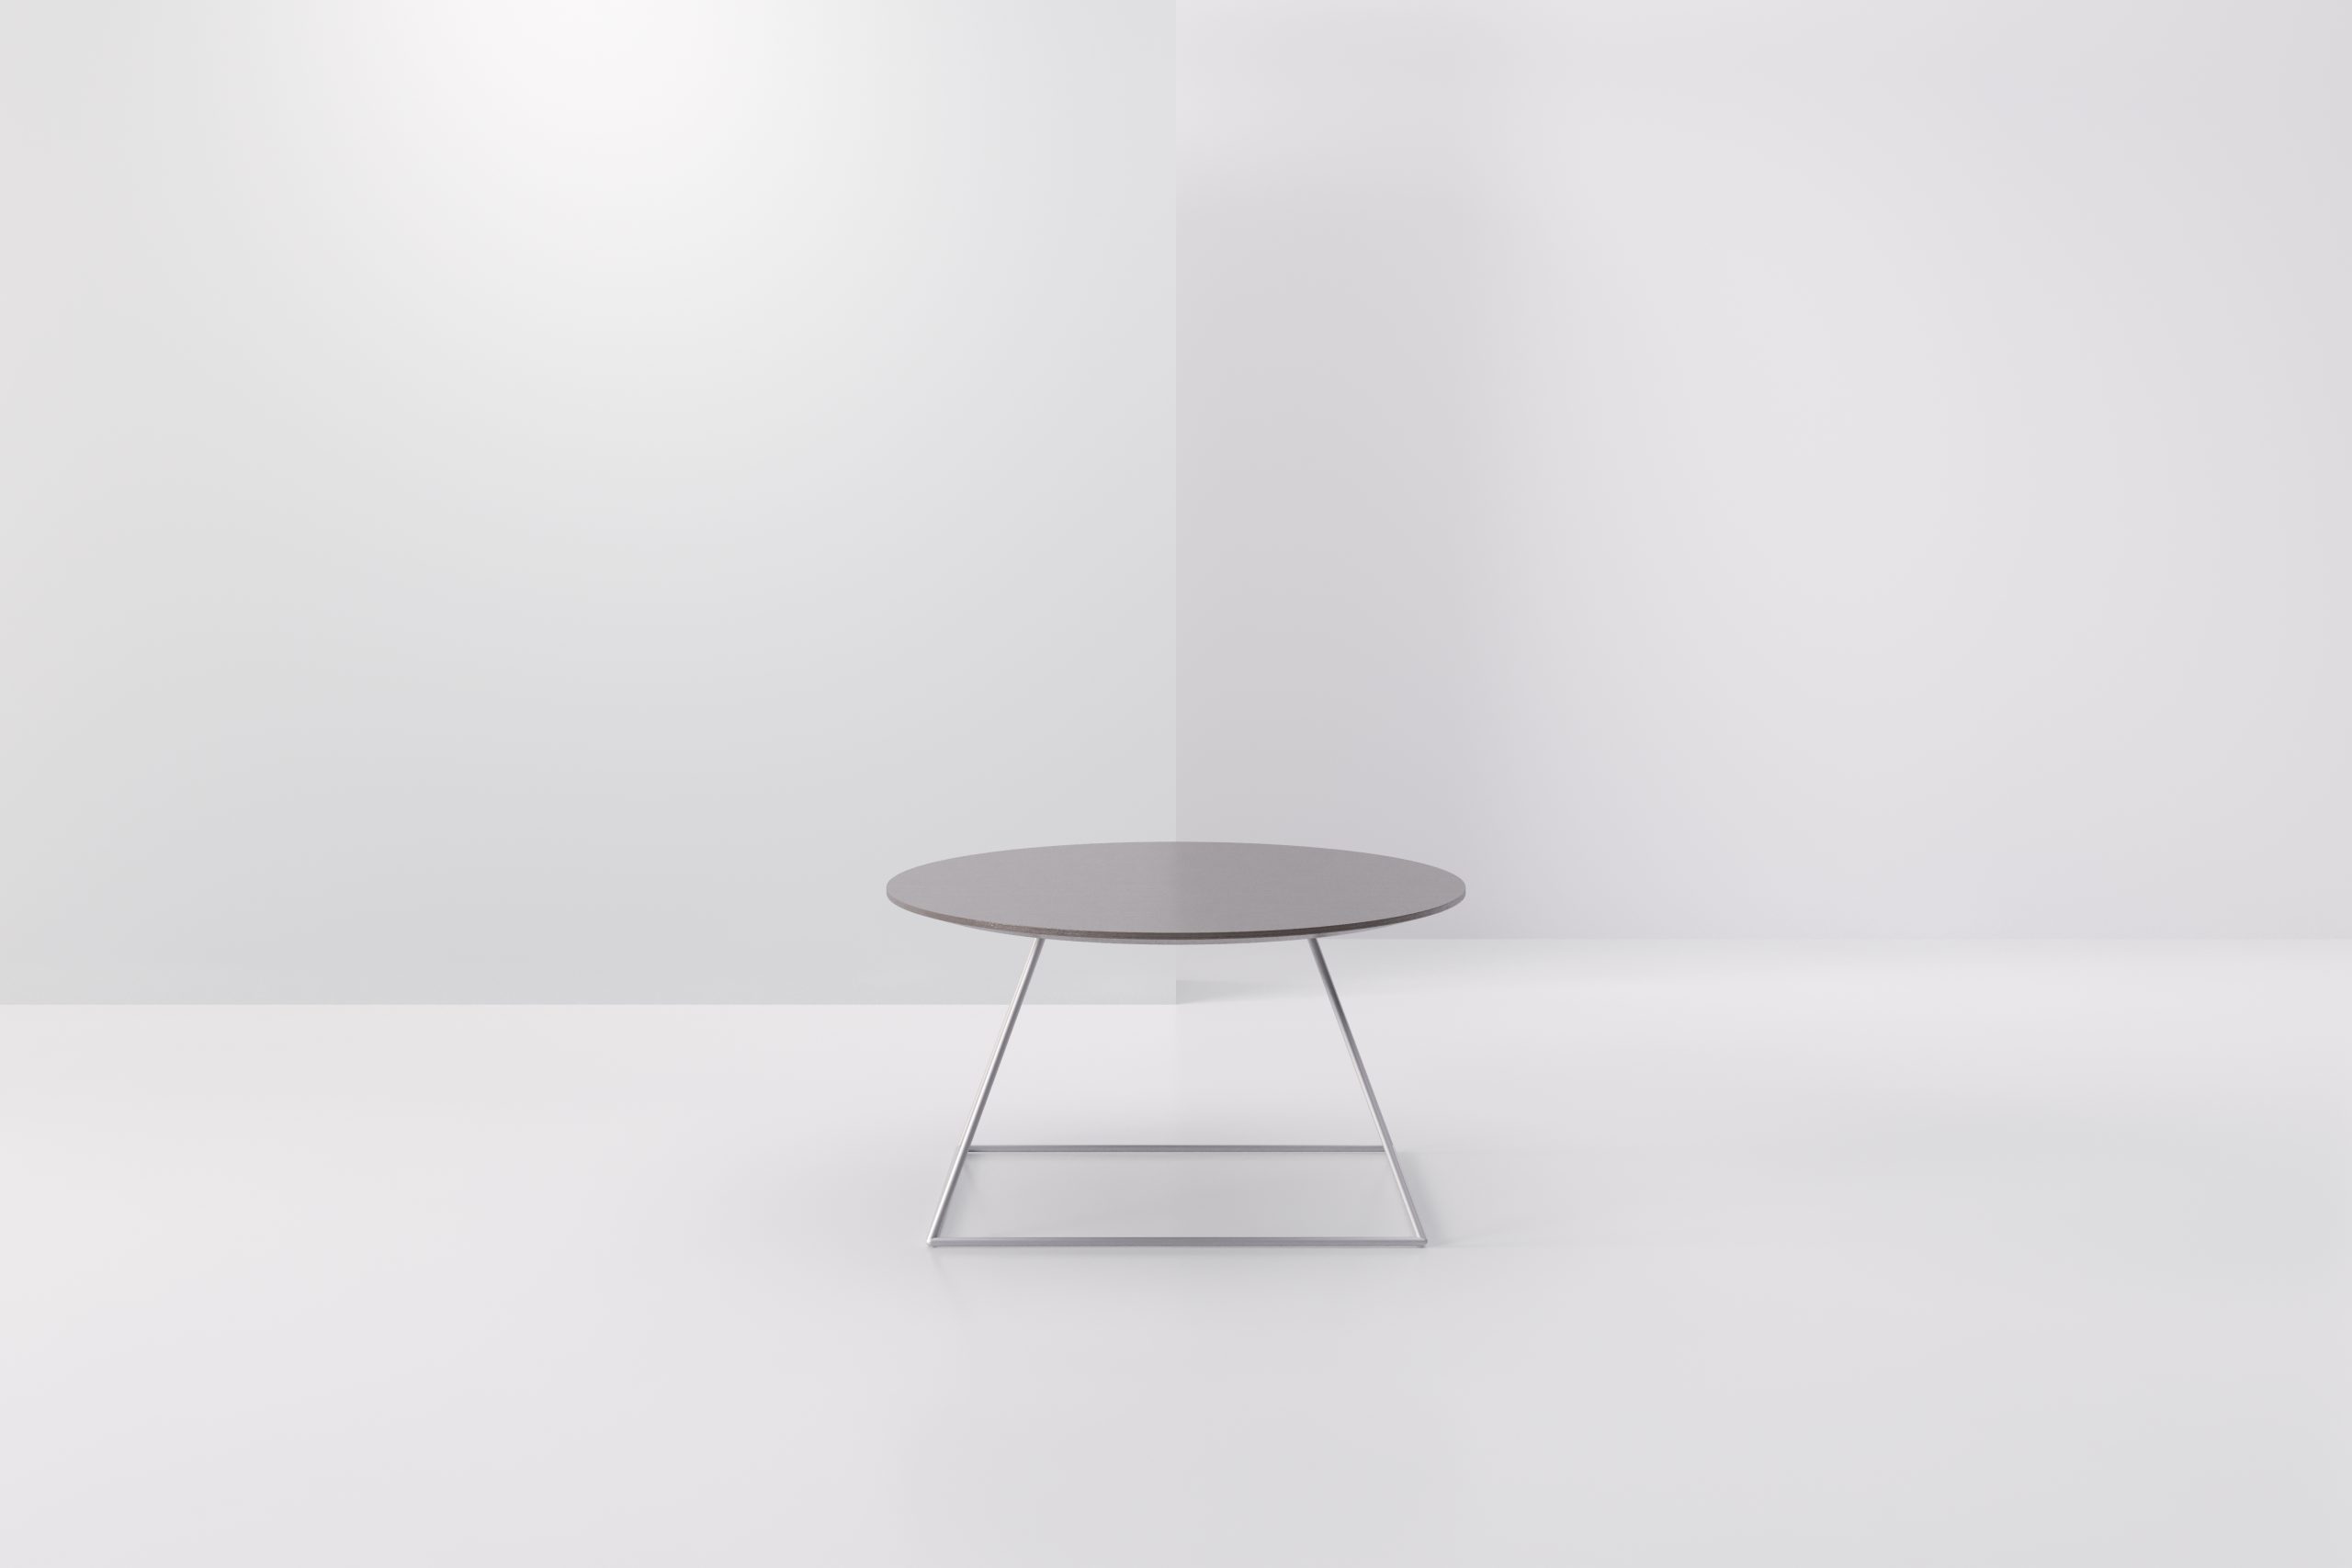 Dayton Large Oval Cocktail Table Product Image 4